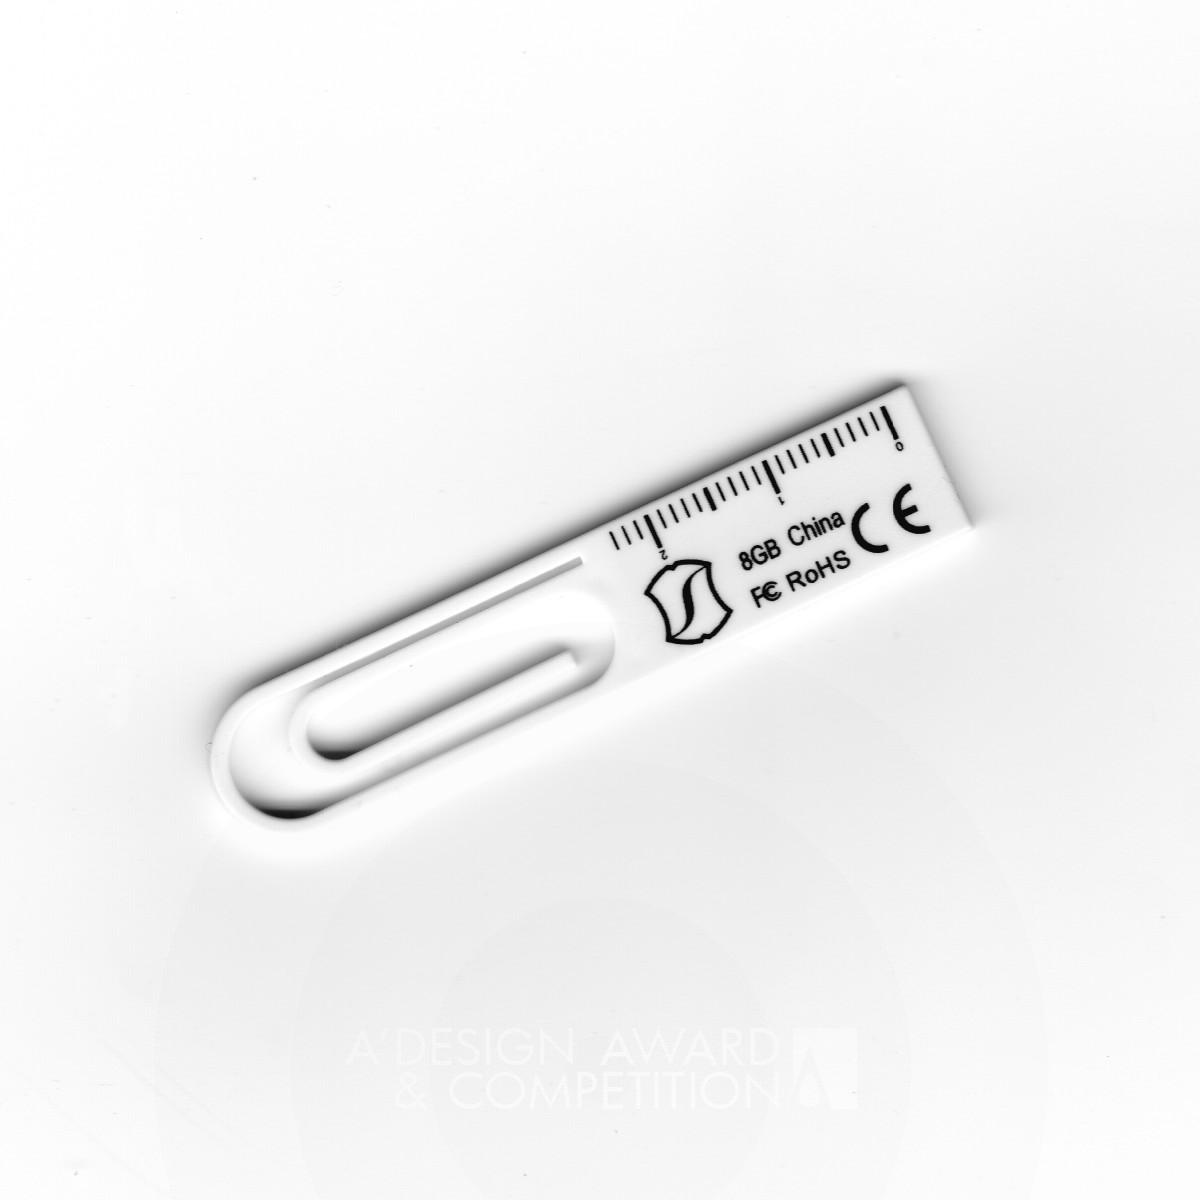 Frohne eClip  USB flash drive  by Derrick Frohne